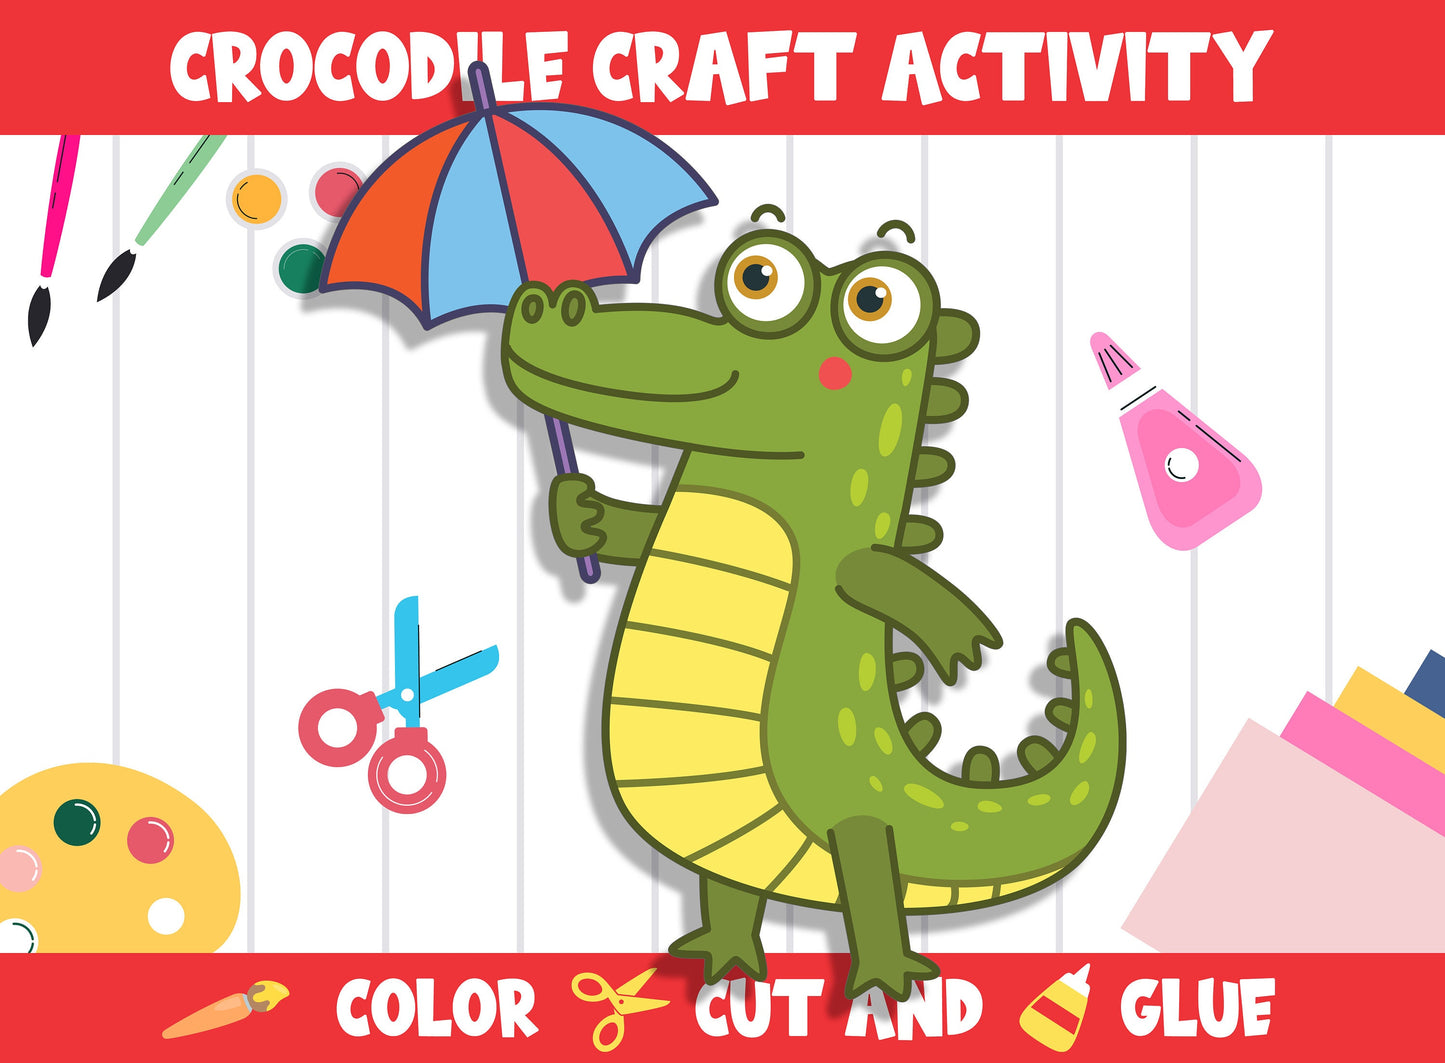 Cute Crocodile Craft Activity - Color, Cut, and Glue for PreK to 2nd Grade, PDF File, Instant Download